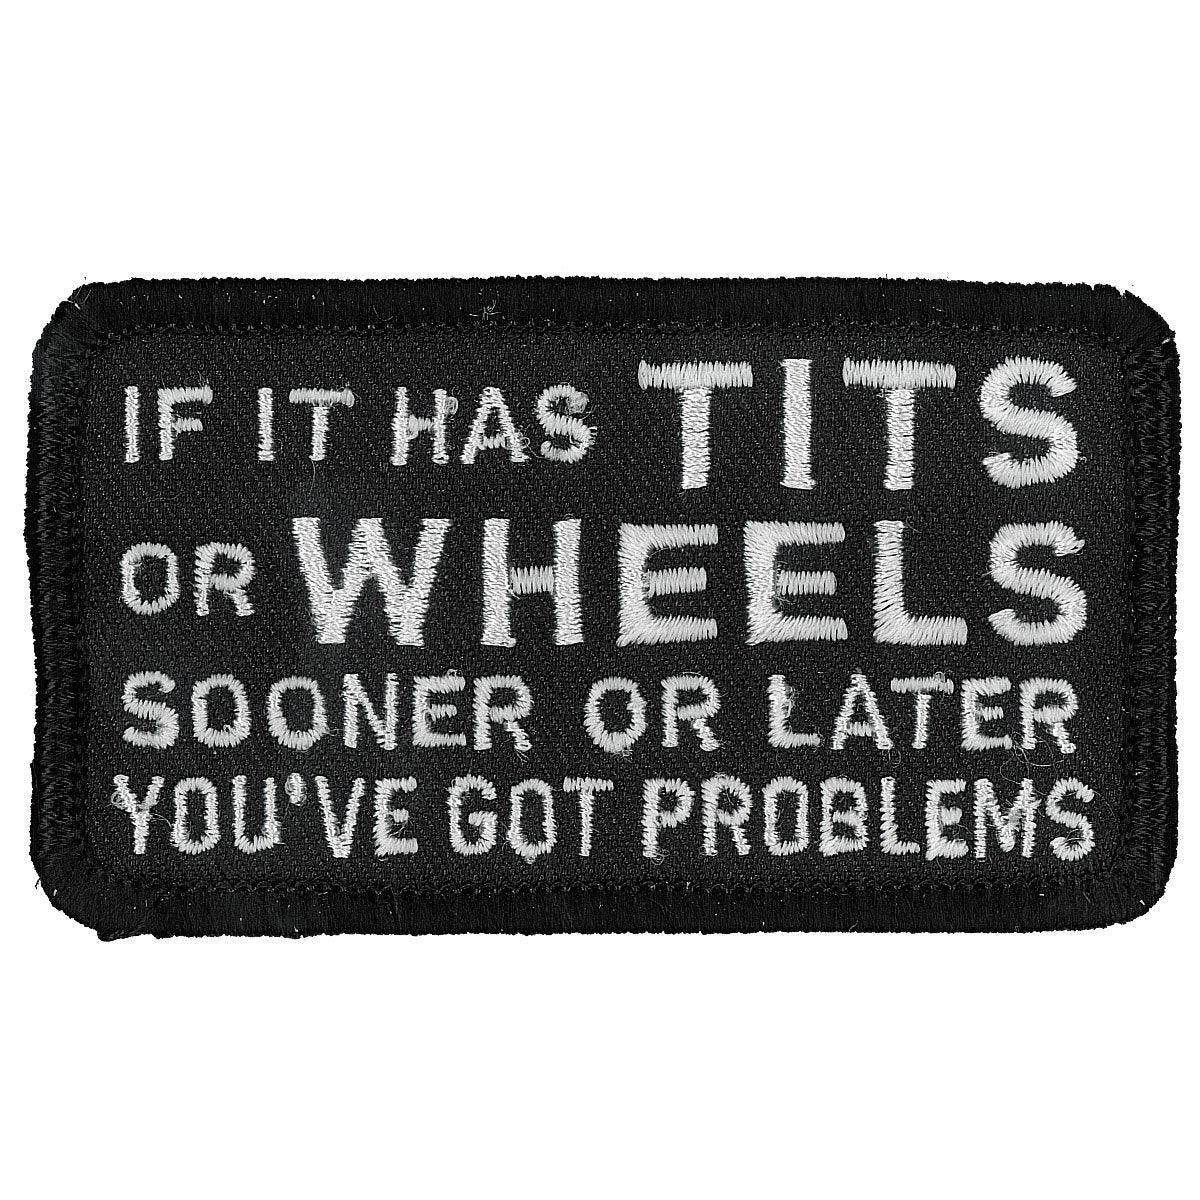 Hot Leathers Patch If It Has Tits Or Wheels - American Legend Rider